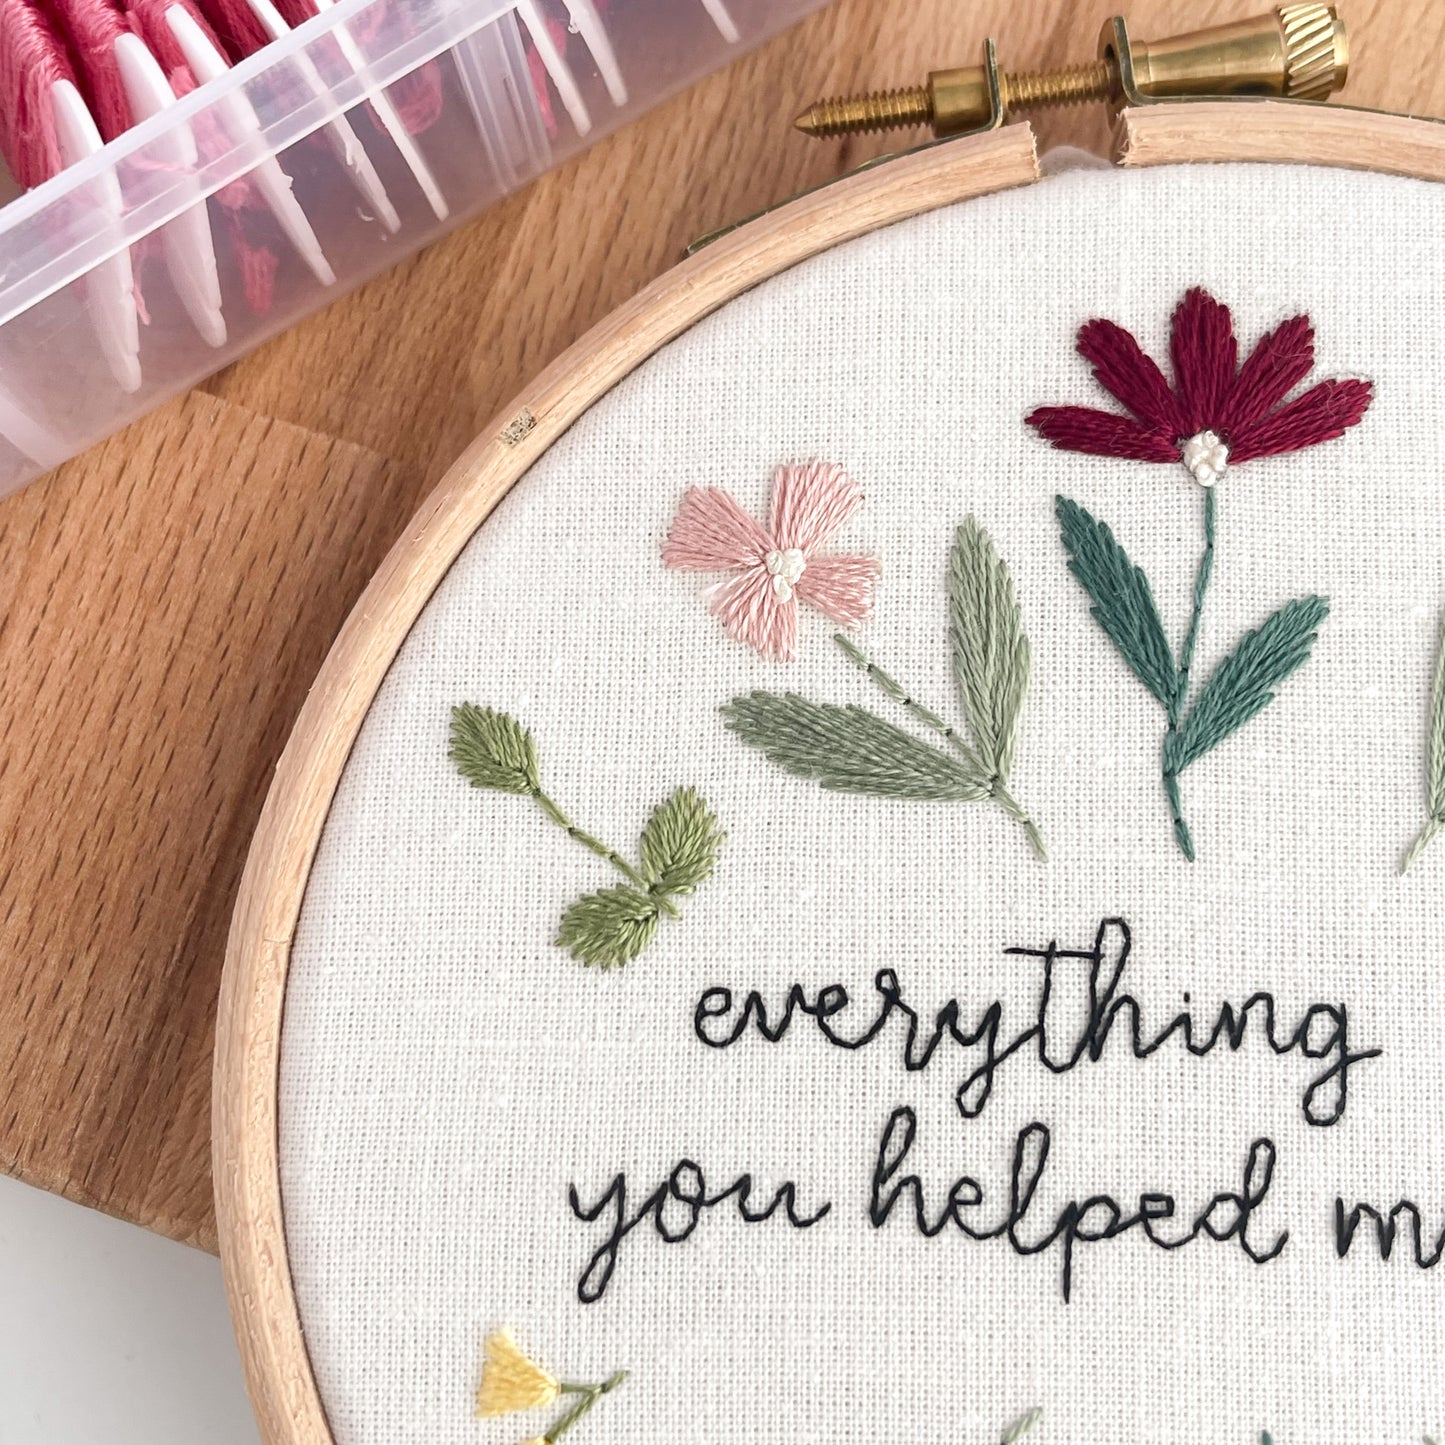 Everything I Am You Helped Me To Be Embroidery Hoop